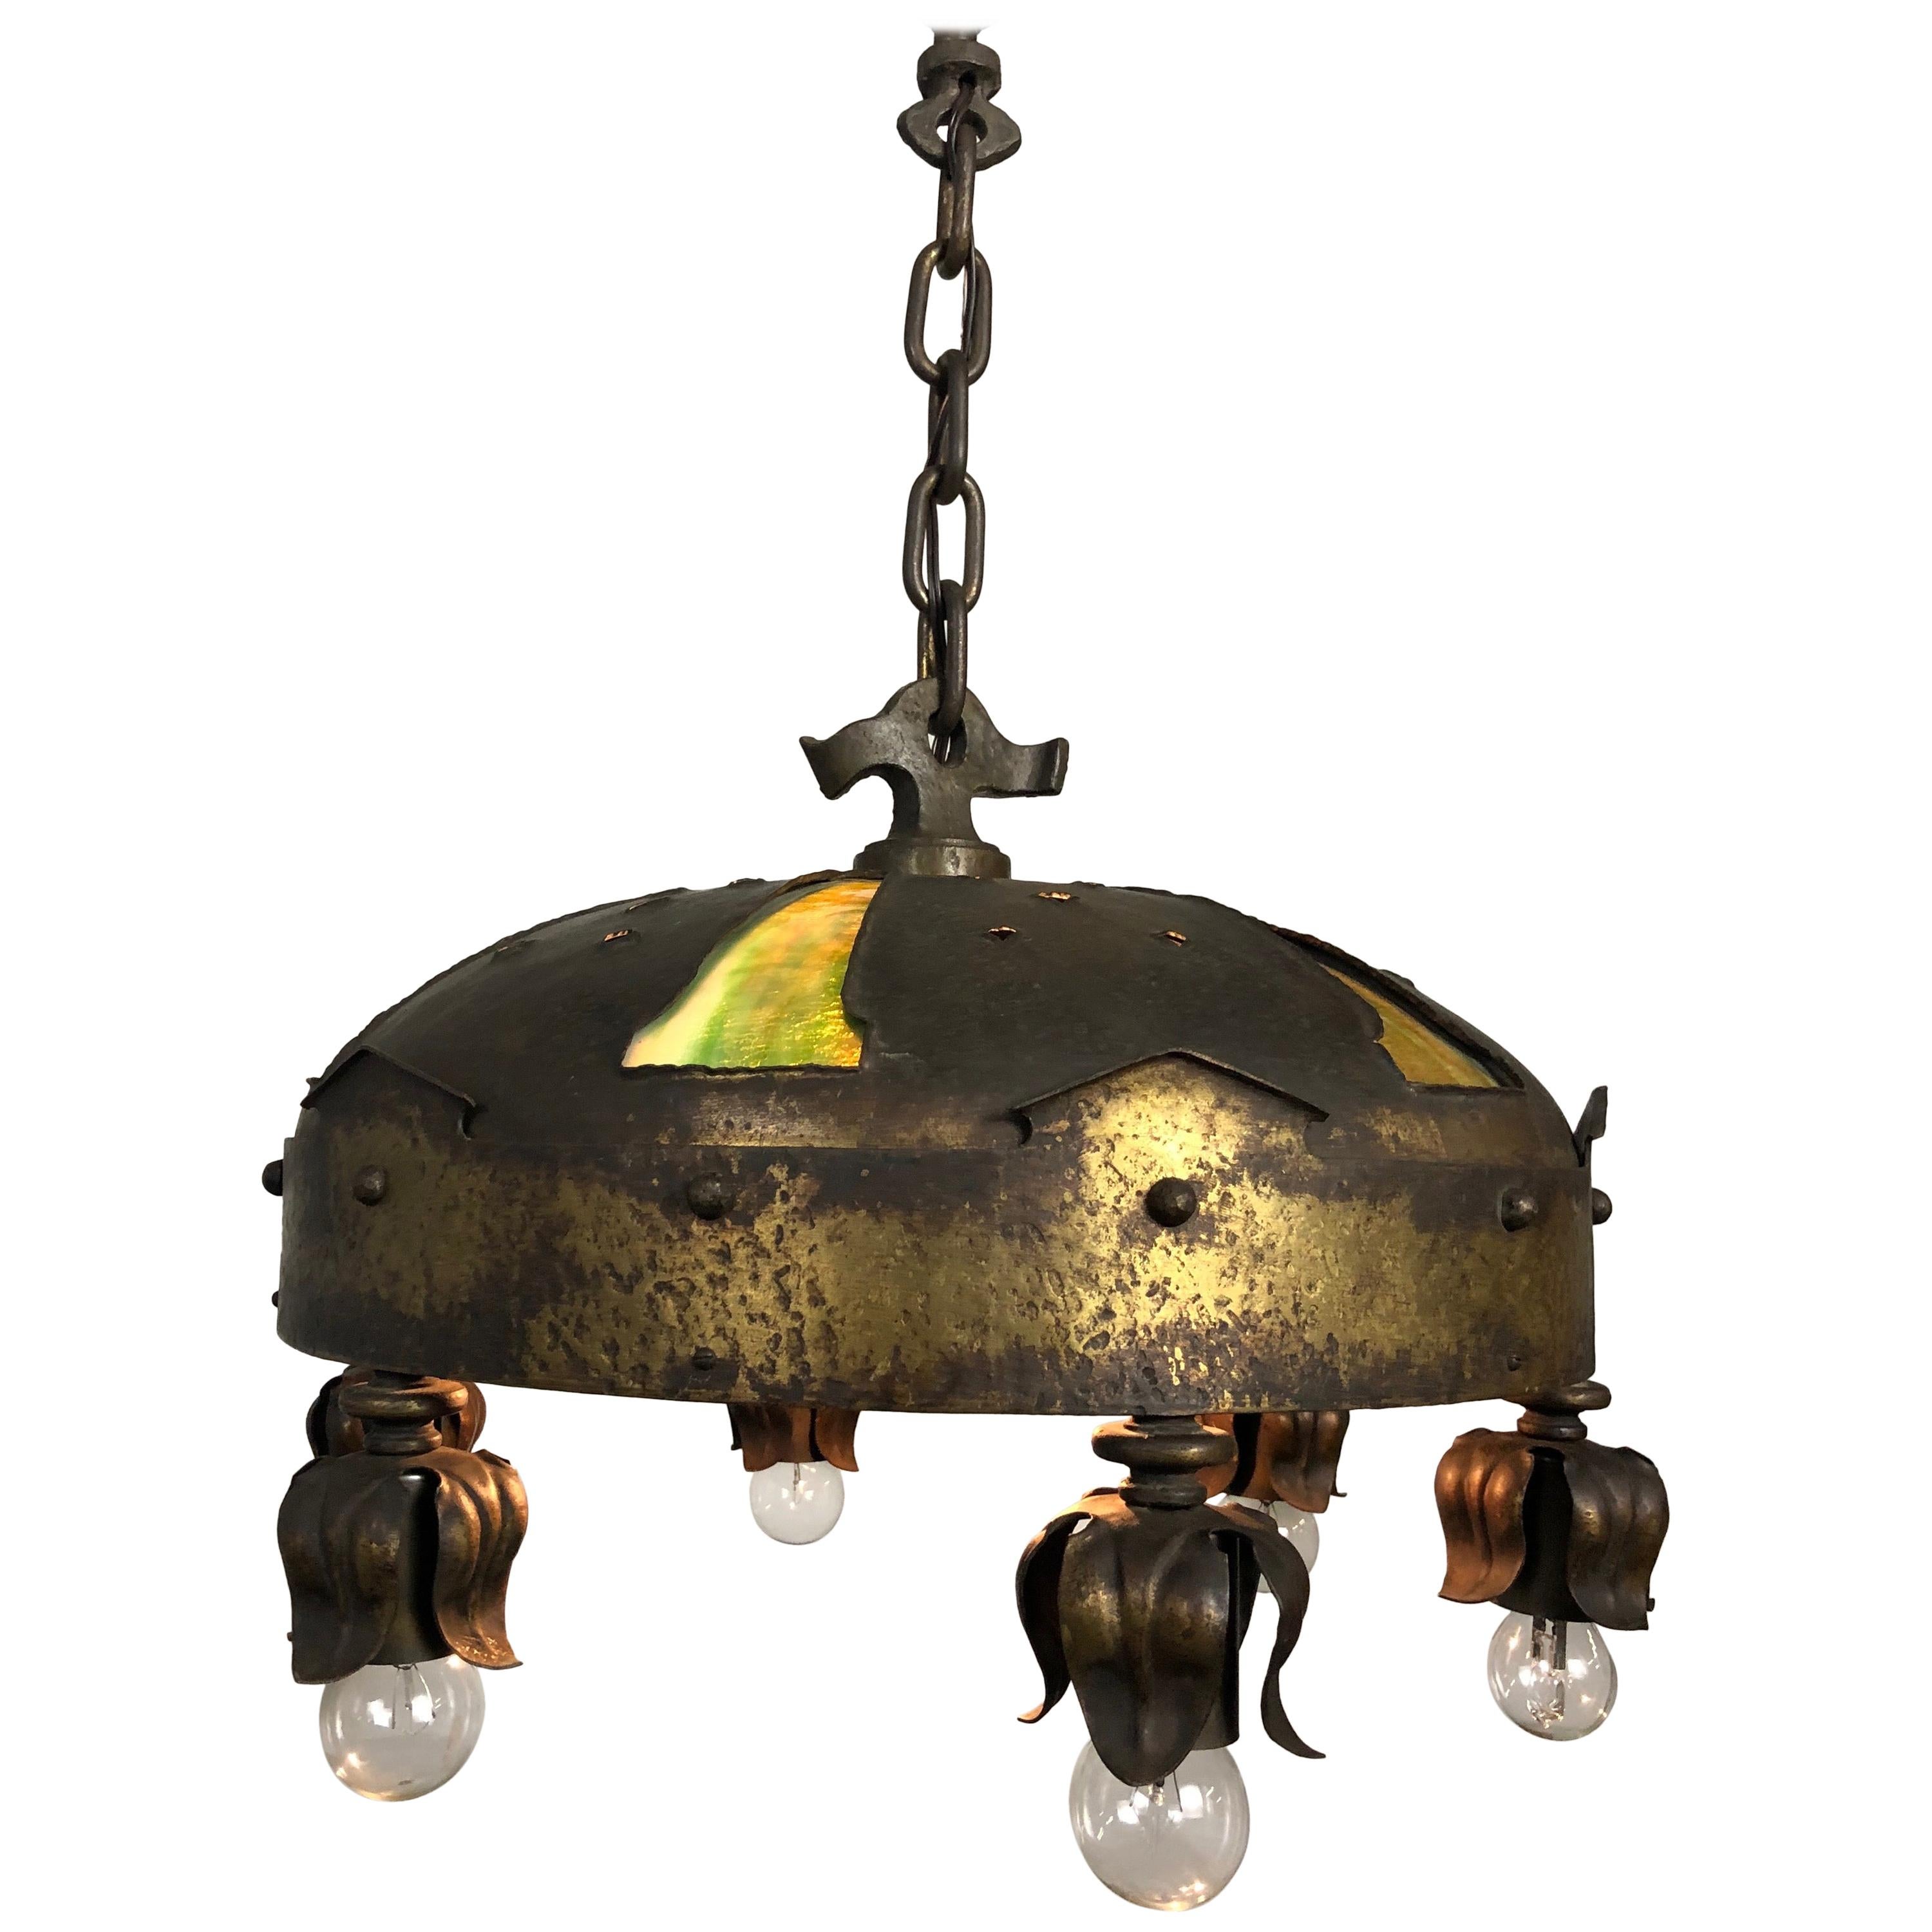 Gothic Revival Arts & Crafts Hand-wrought & Hammered Light Fixture